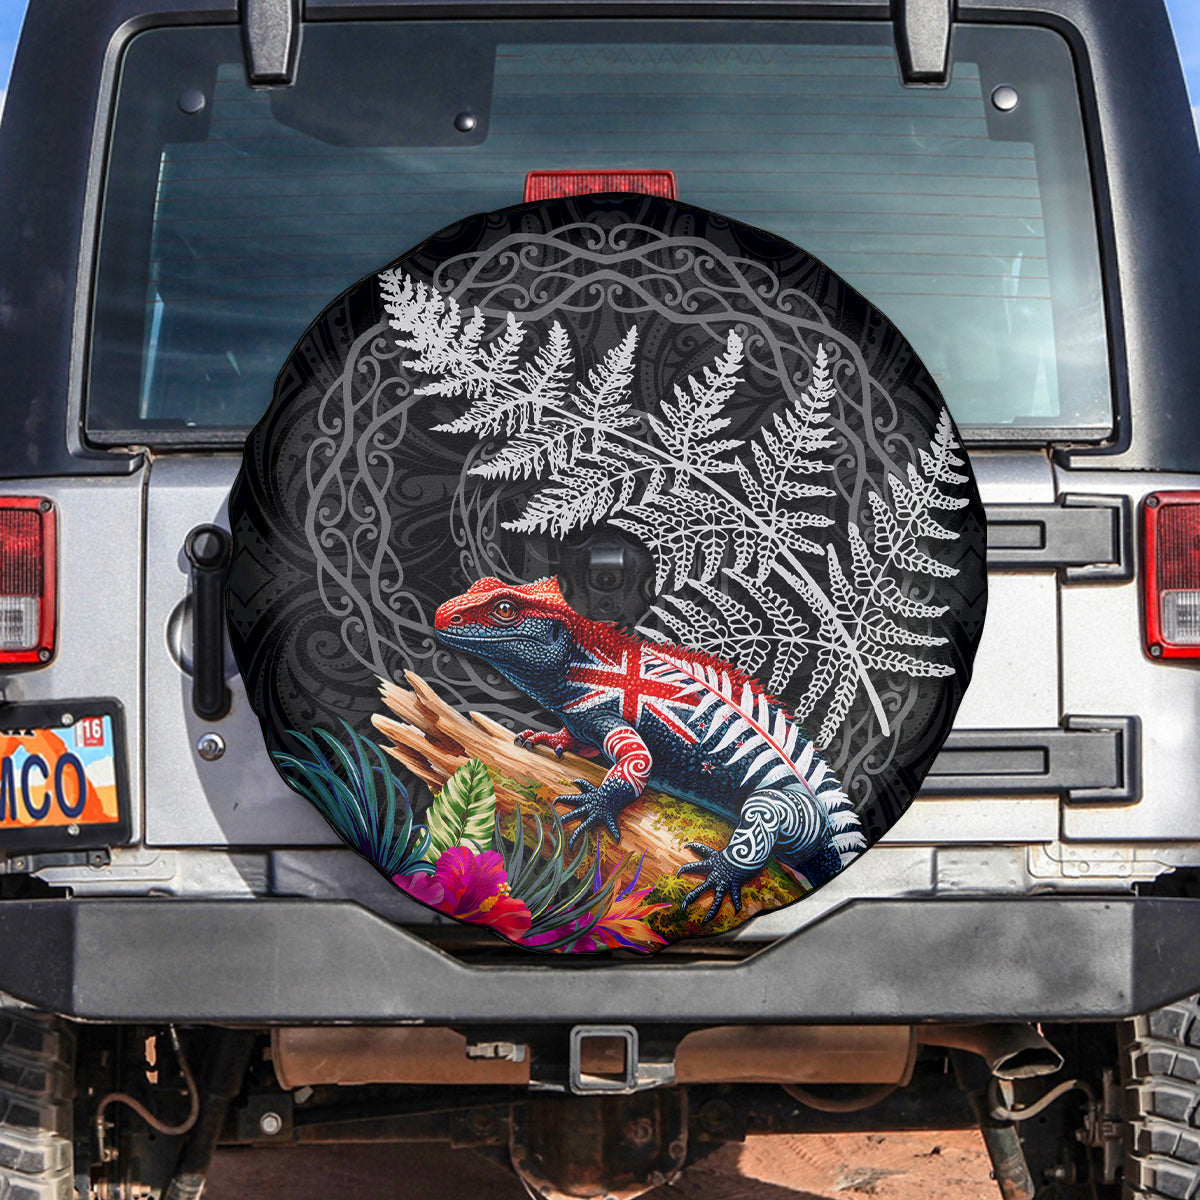 New Zealand Tuatara Spare Tire Cover Silver Fern Hibiscus and Tribal Maori Pattern Black Color